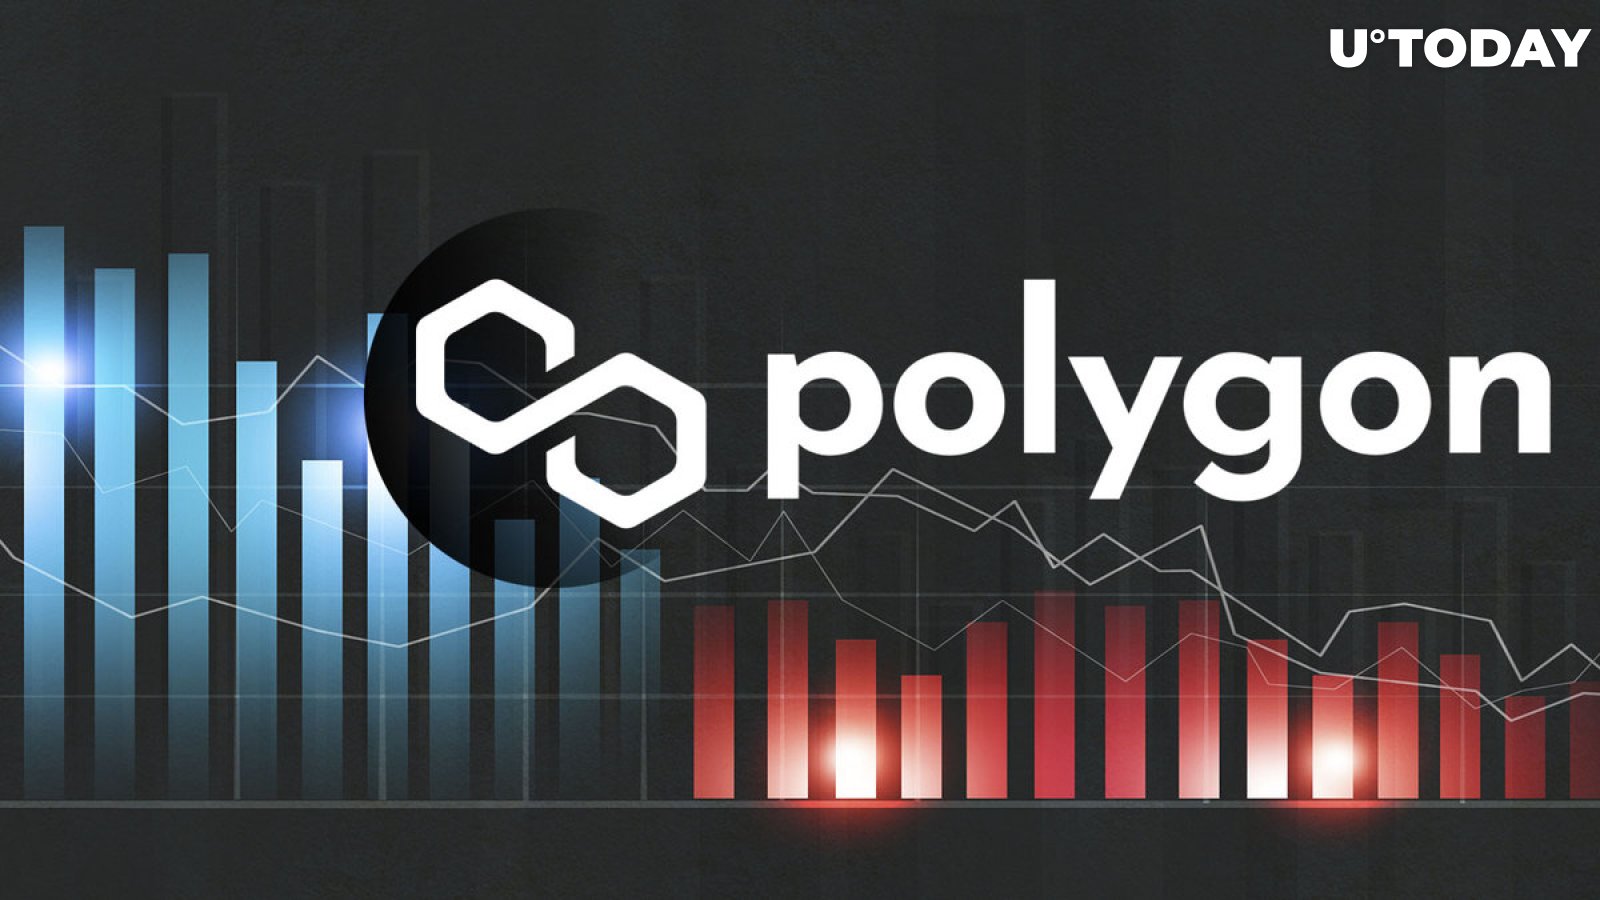 Polygon's (MATIC) Drop Under Crucial Support Level May Cause Further Price Fall: Analyst